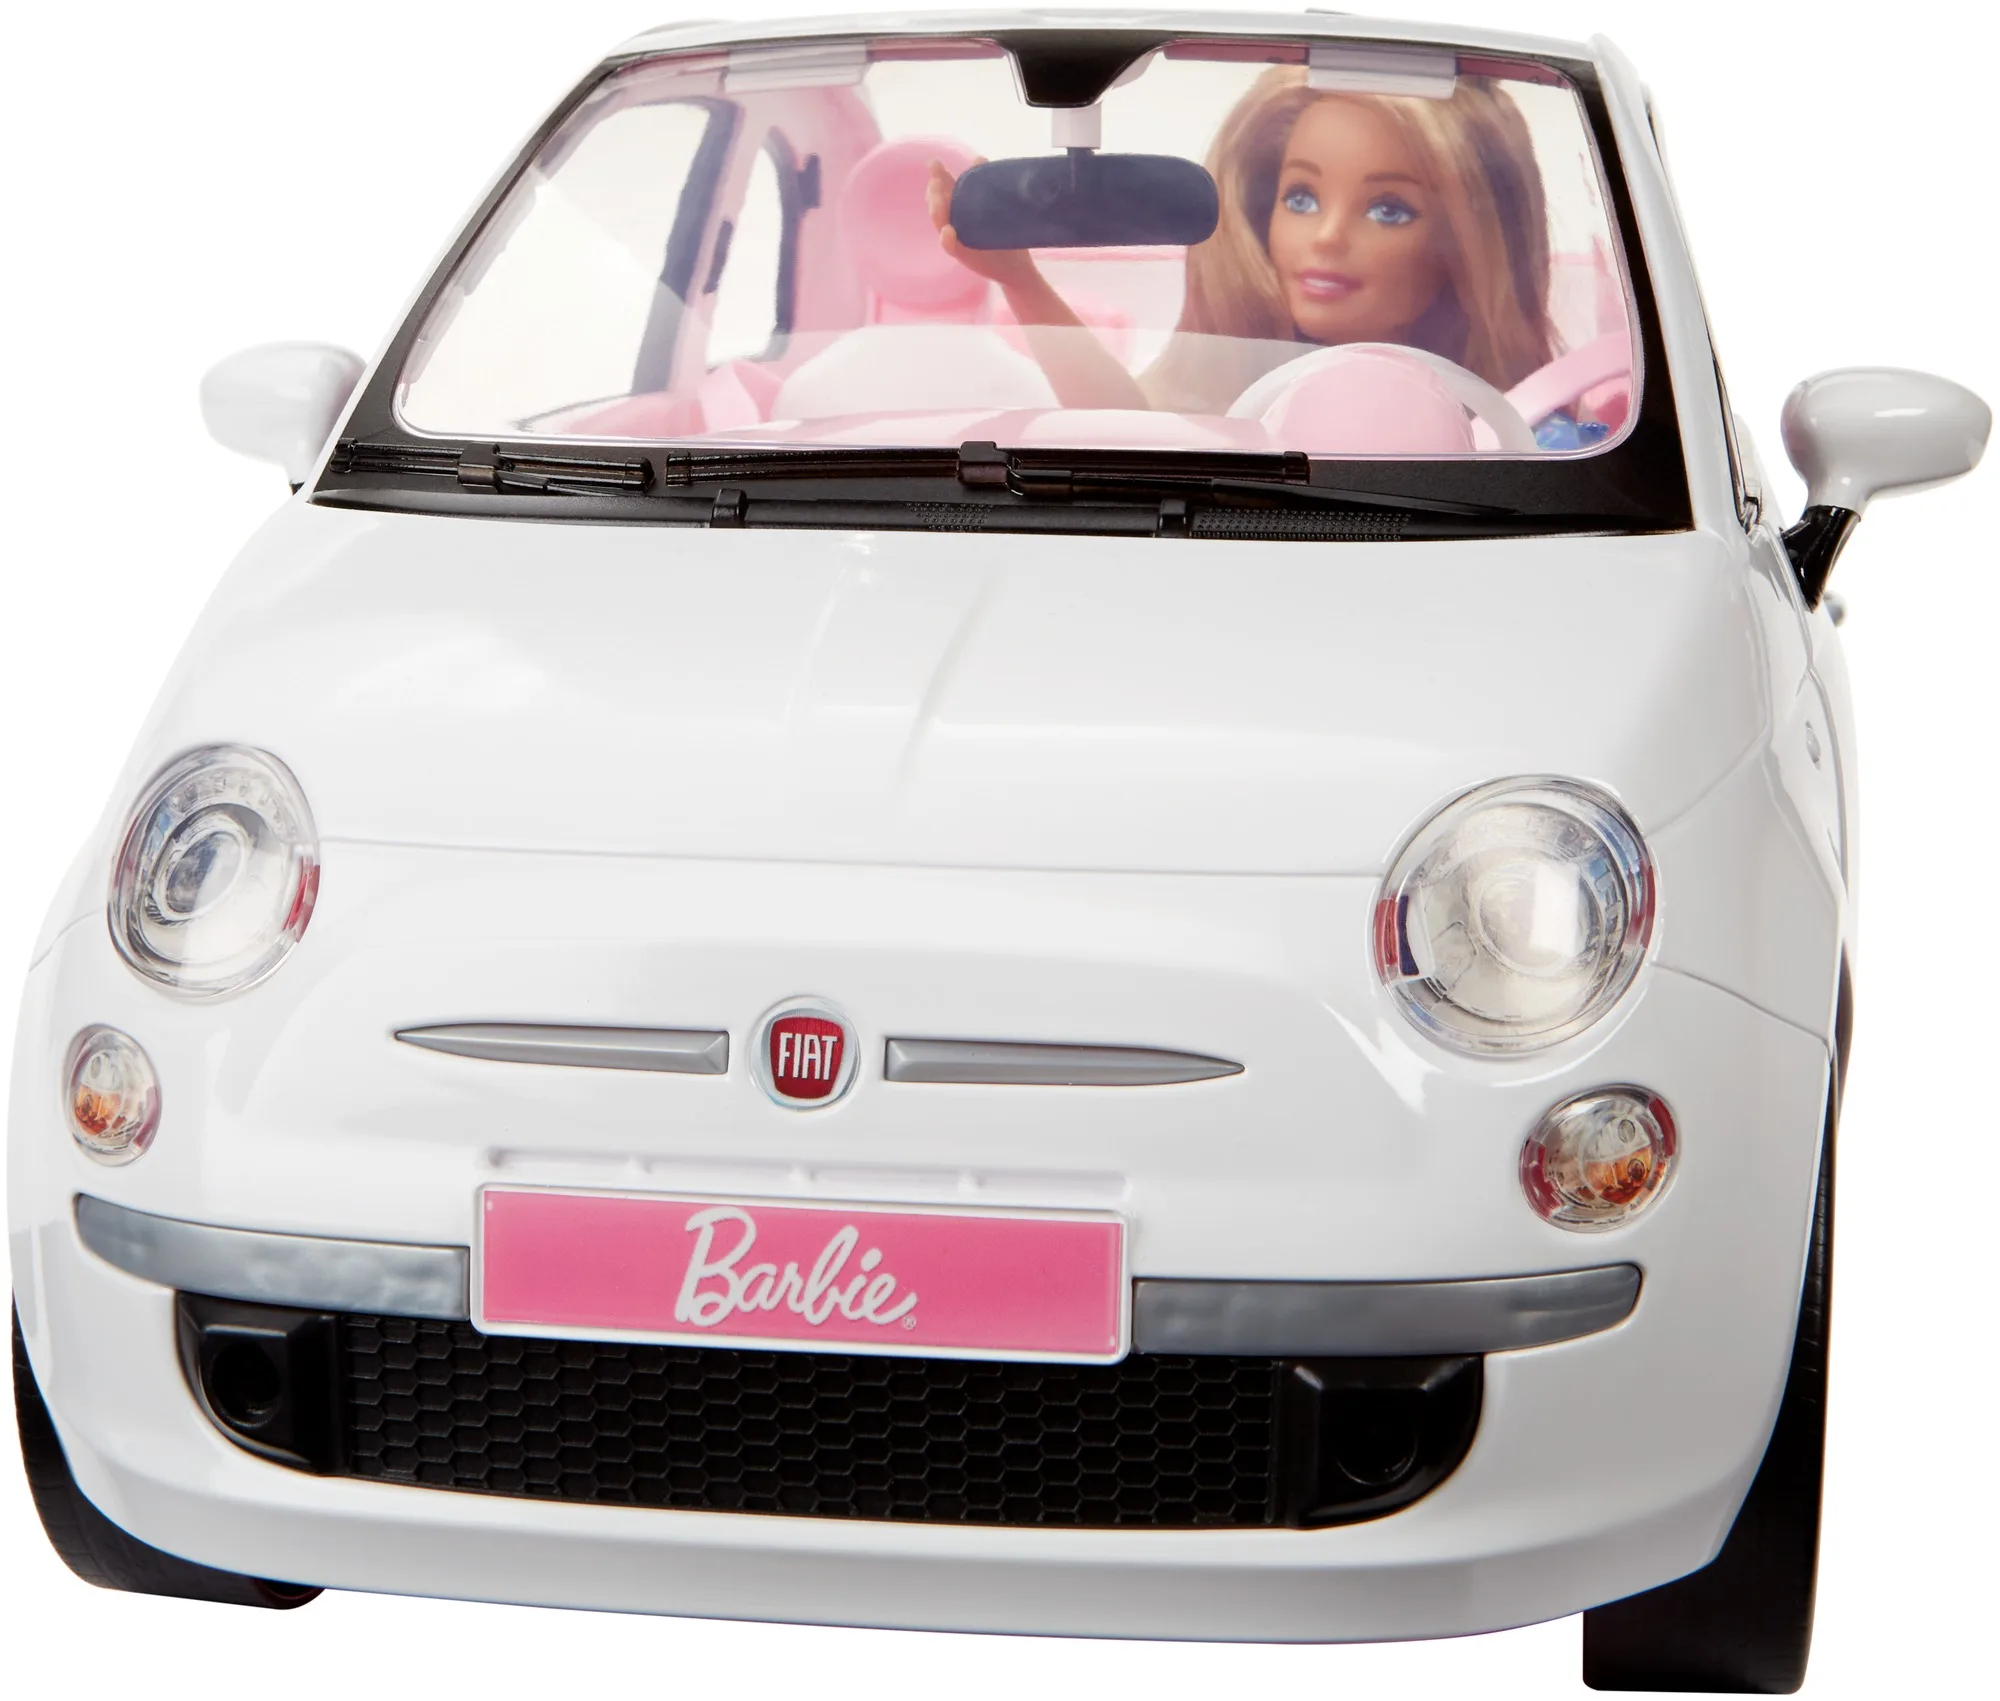 Barbie Car Fiat, Doll With Fiat 500 Color And Pink, Funny Toy Boys And Girls 3 - 9 Years Old (mattel Fvr07) - Dolls - AliExpress